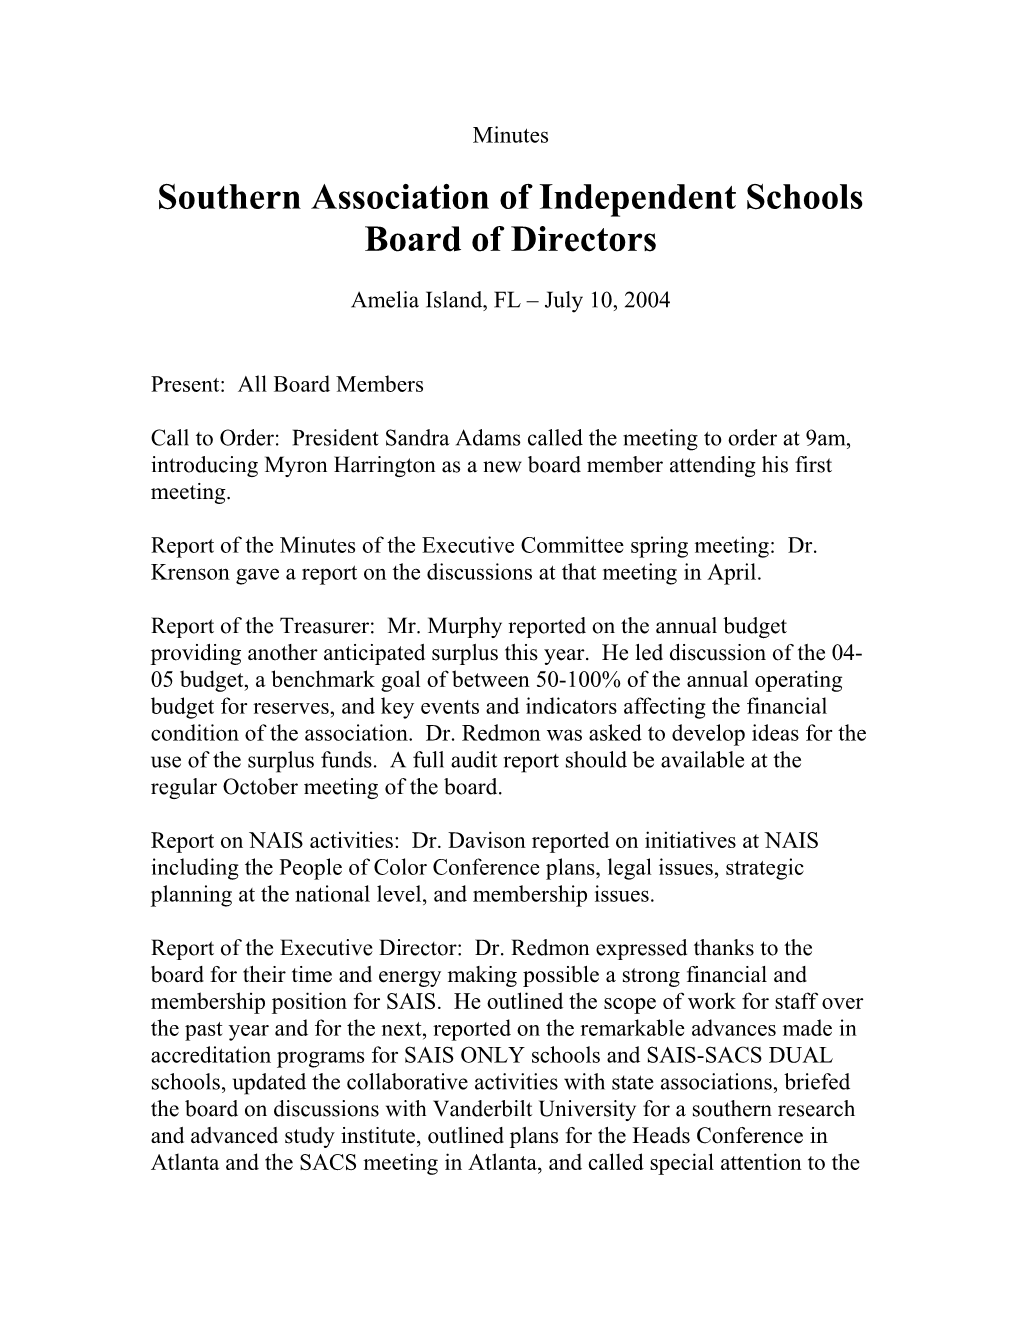 Southern Association of Independent Schools